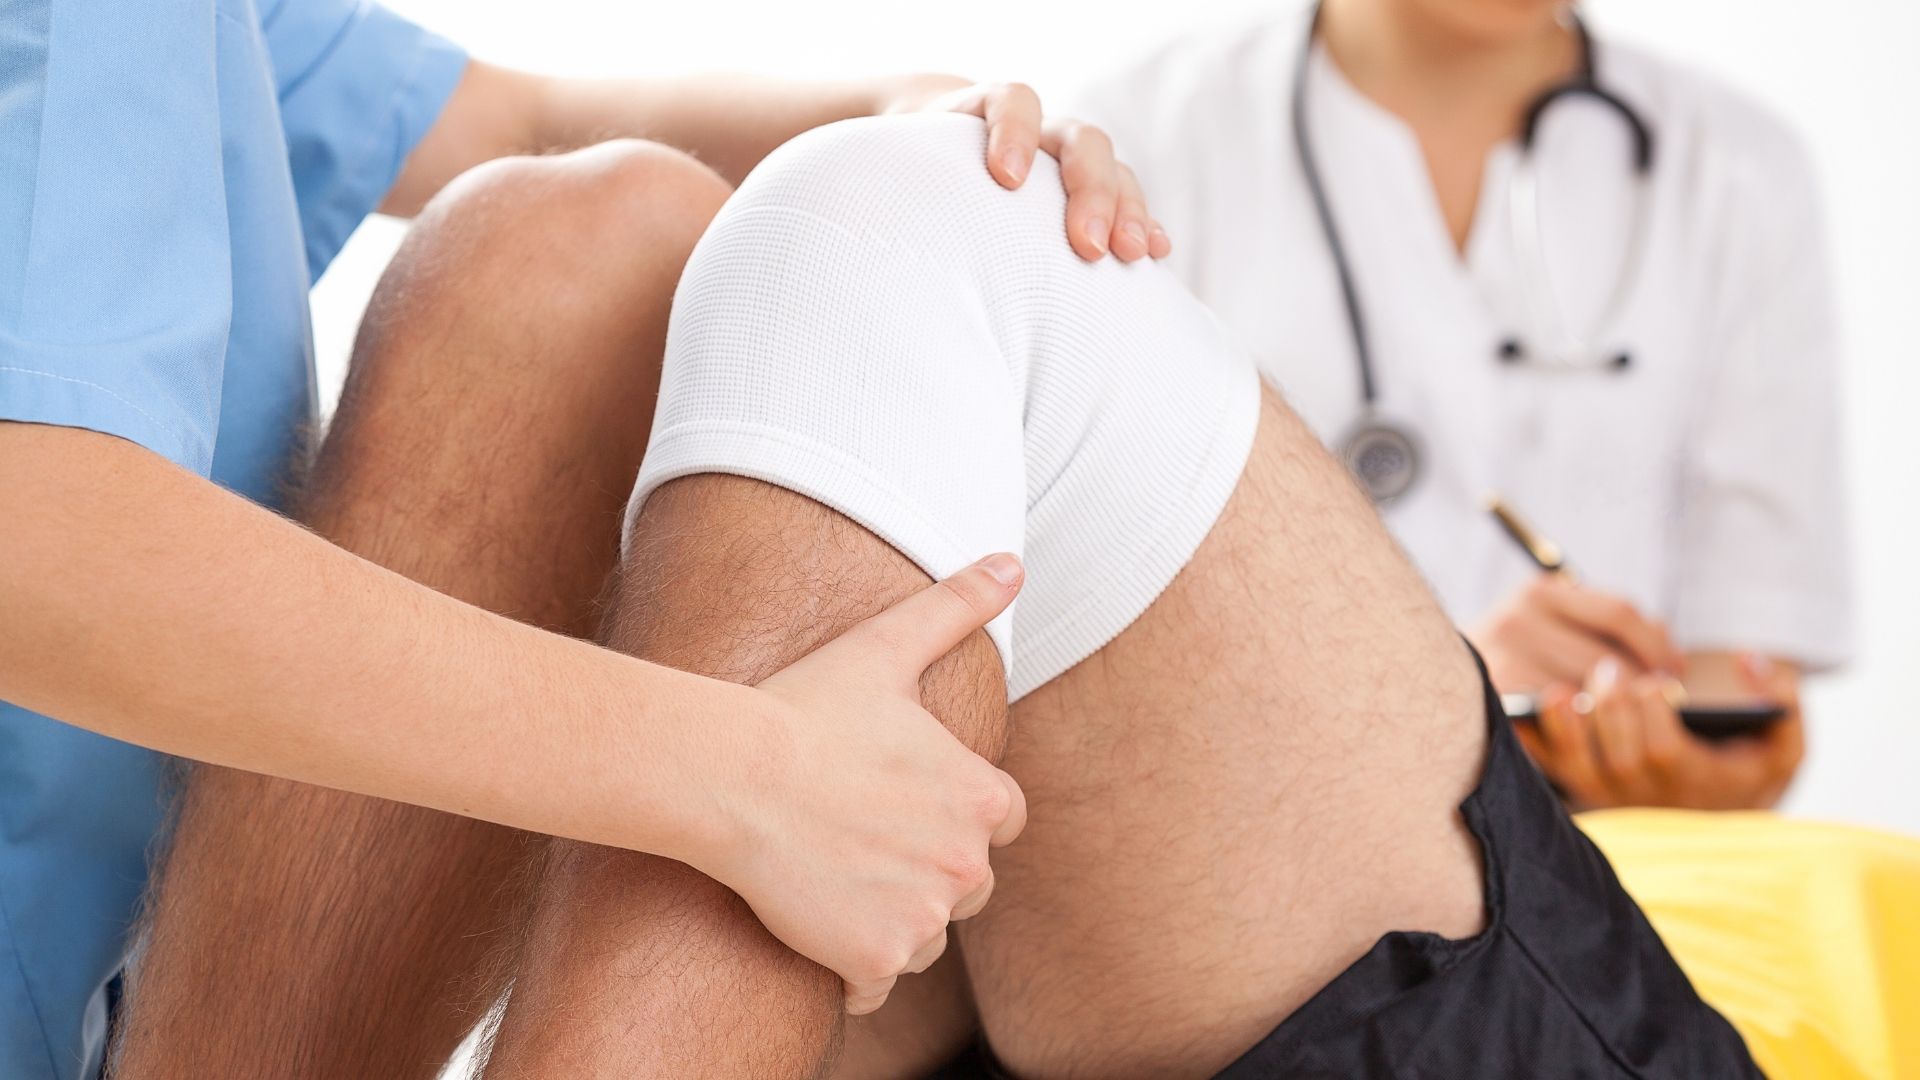 knee surgery compensation claims with TMNE